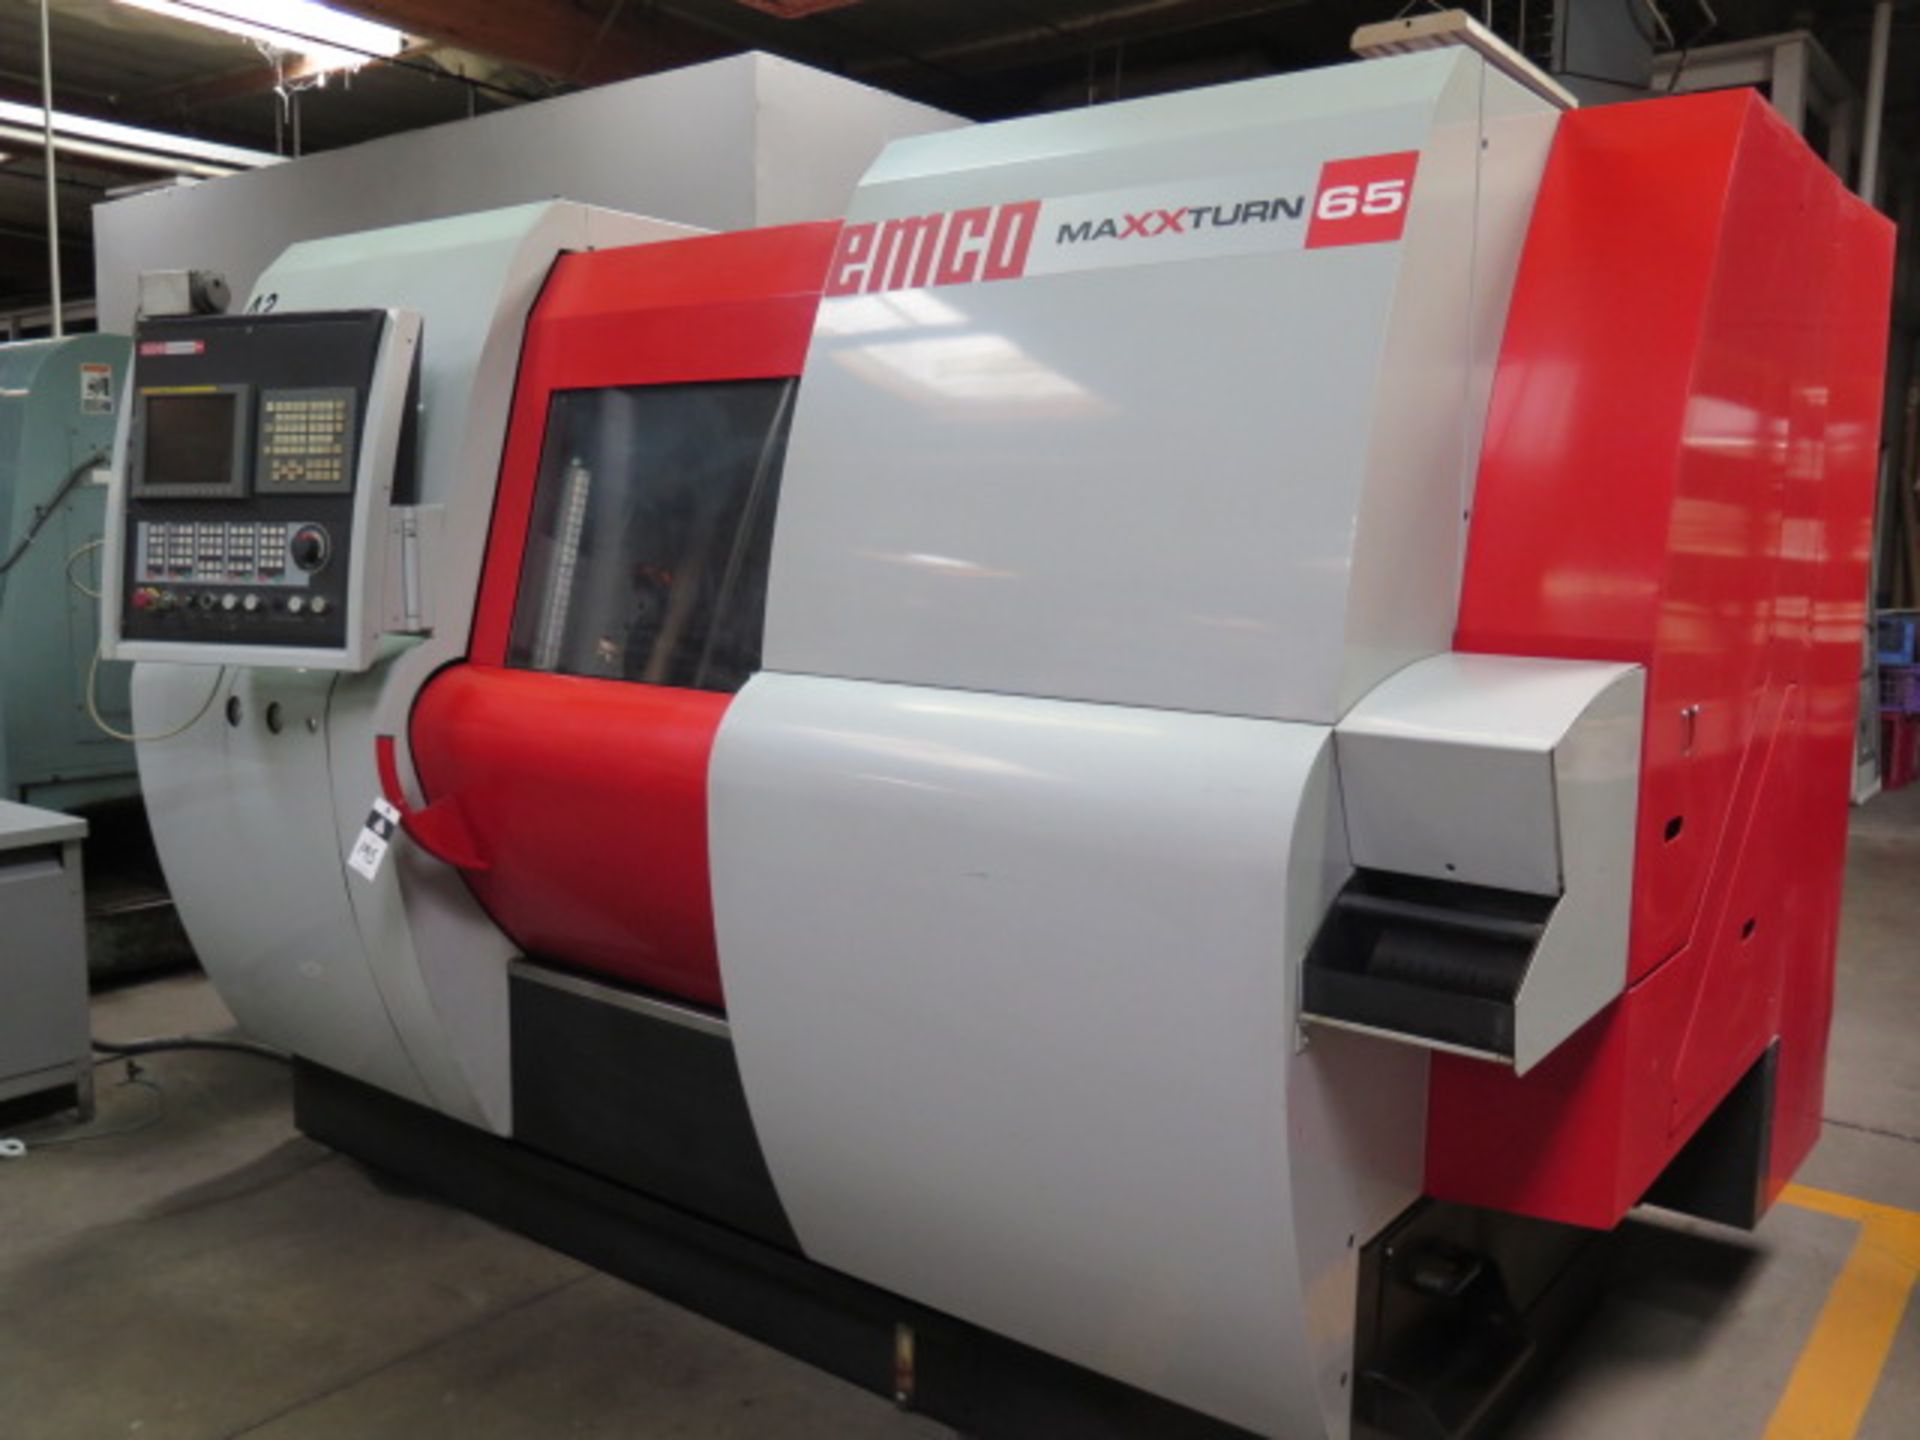 2007 Emco MaxxTurn 65 Twin Spindle, Live Turret CNC Turning Center s/n S6F-V03/S6BV-2559, SOLD AS IS - Image 3 of 16